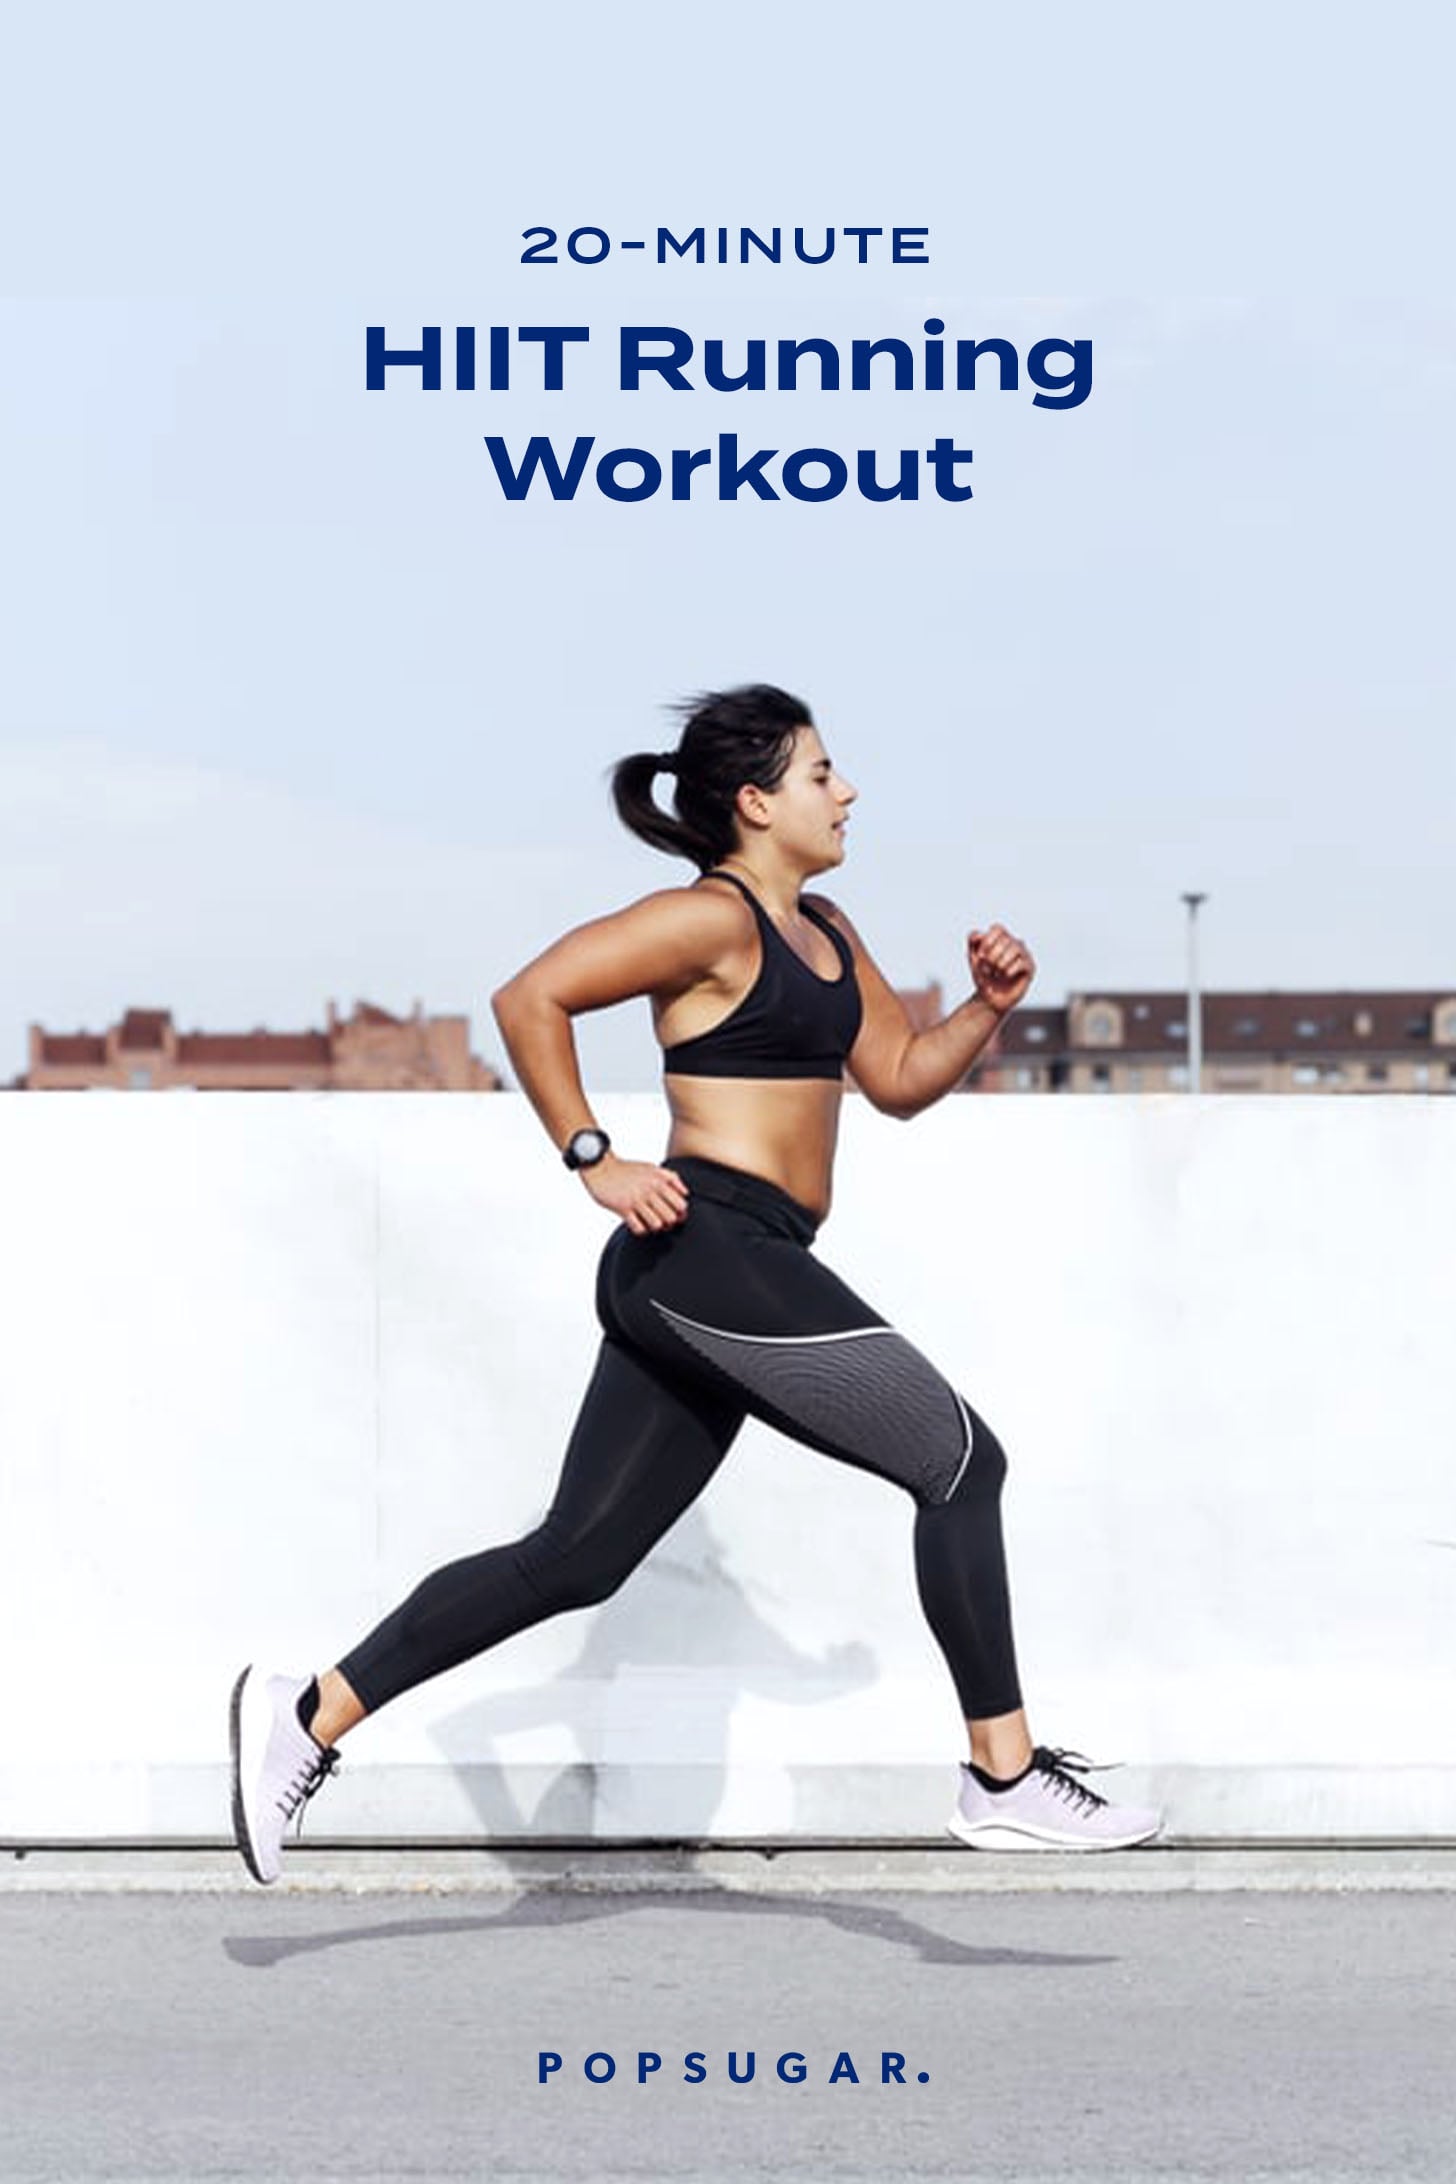 Why You Should Do Outdoor HIIT Workouts